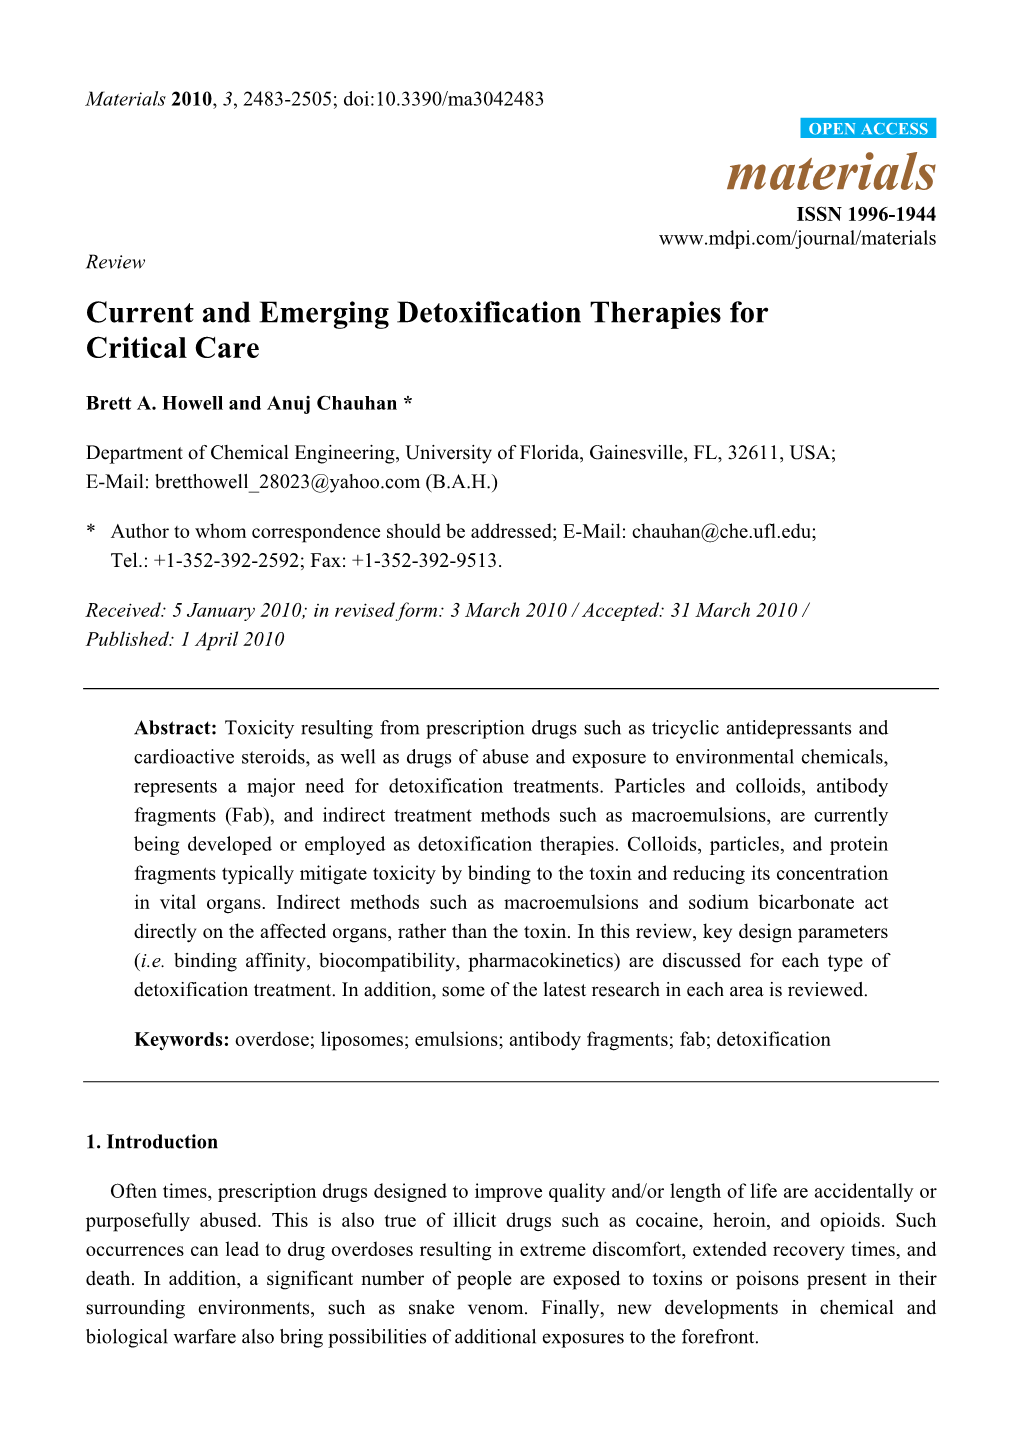 Current and Emerging Detoxification Therapies for Critical Care